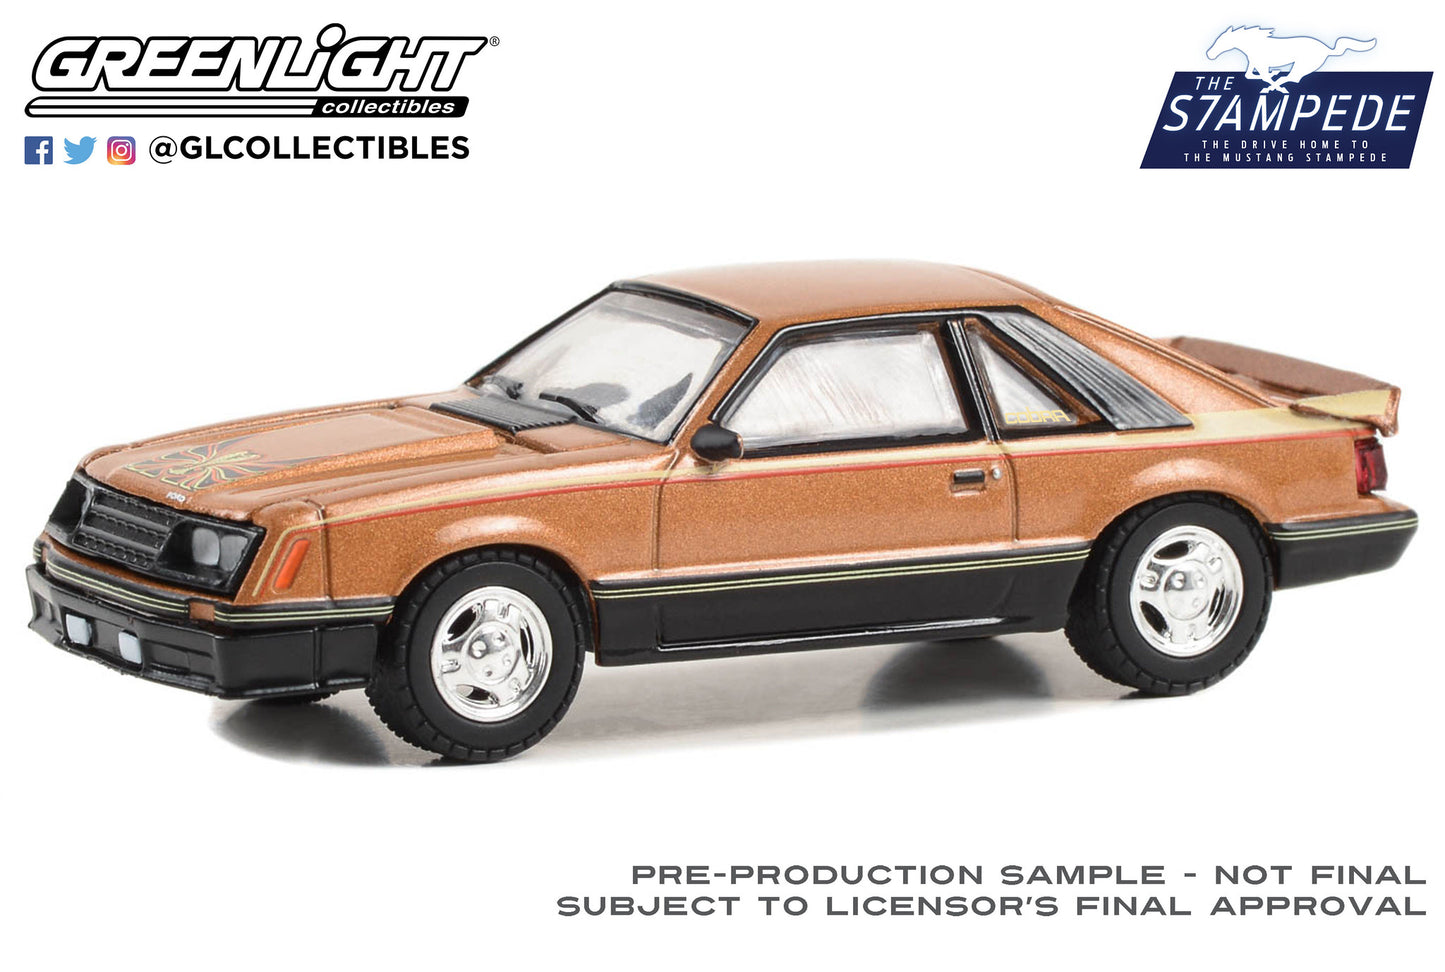 GreenLight 1:64 The Drive Home to the Mustang Stampede Series 1 - 1980 Ford Mustang Cobra - Dark Chamois 13340-F